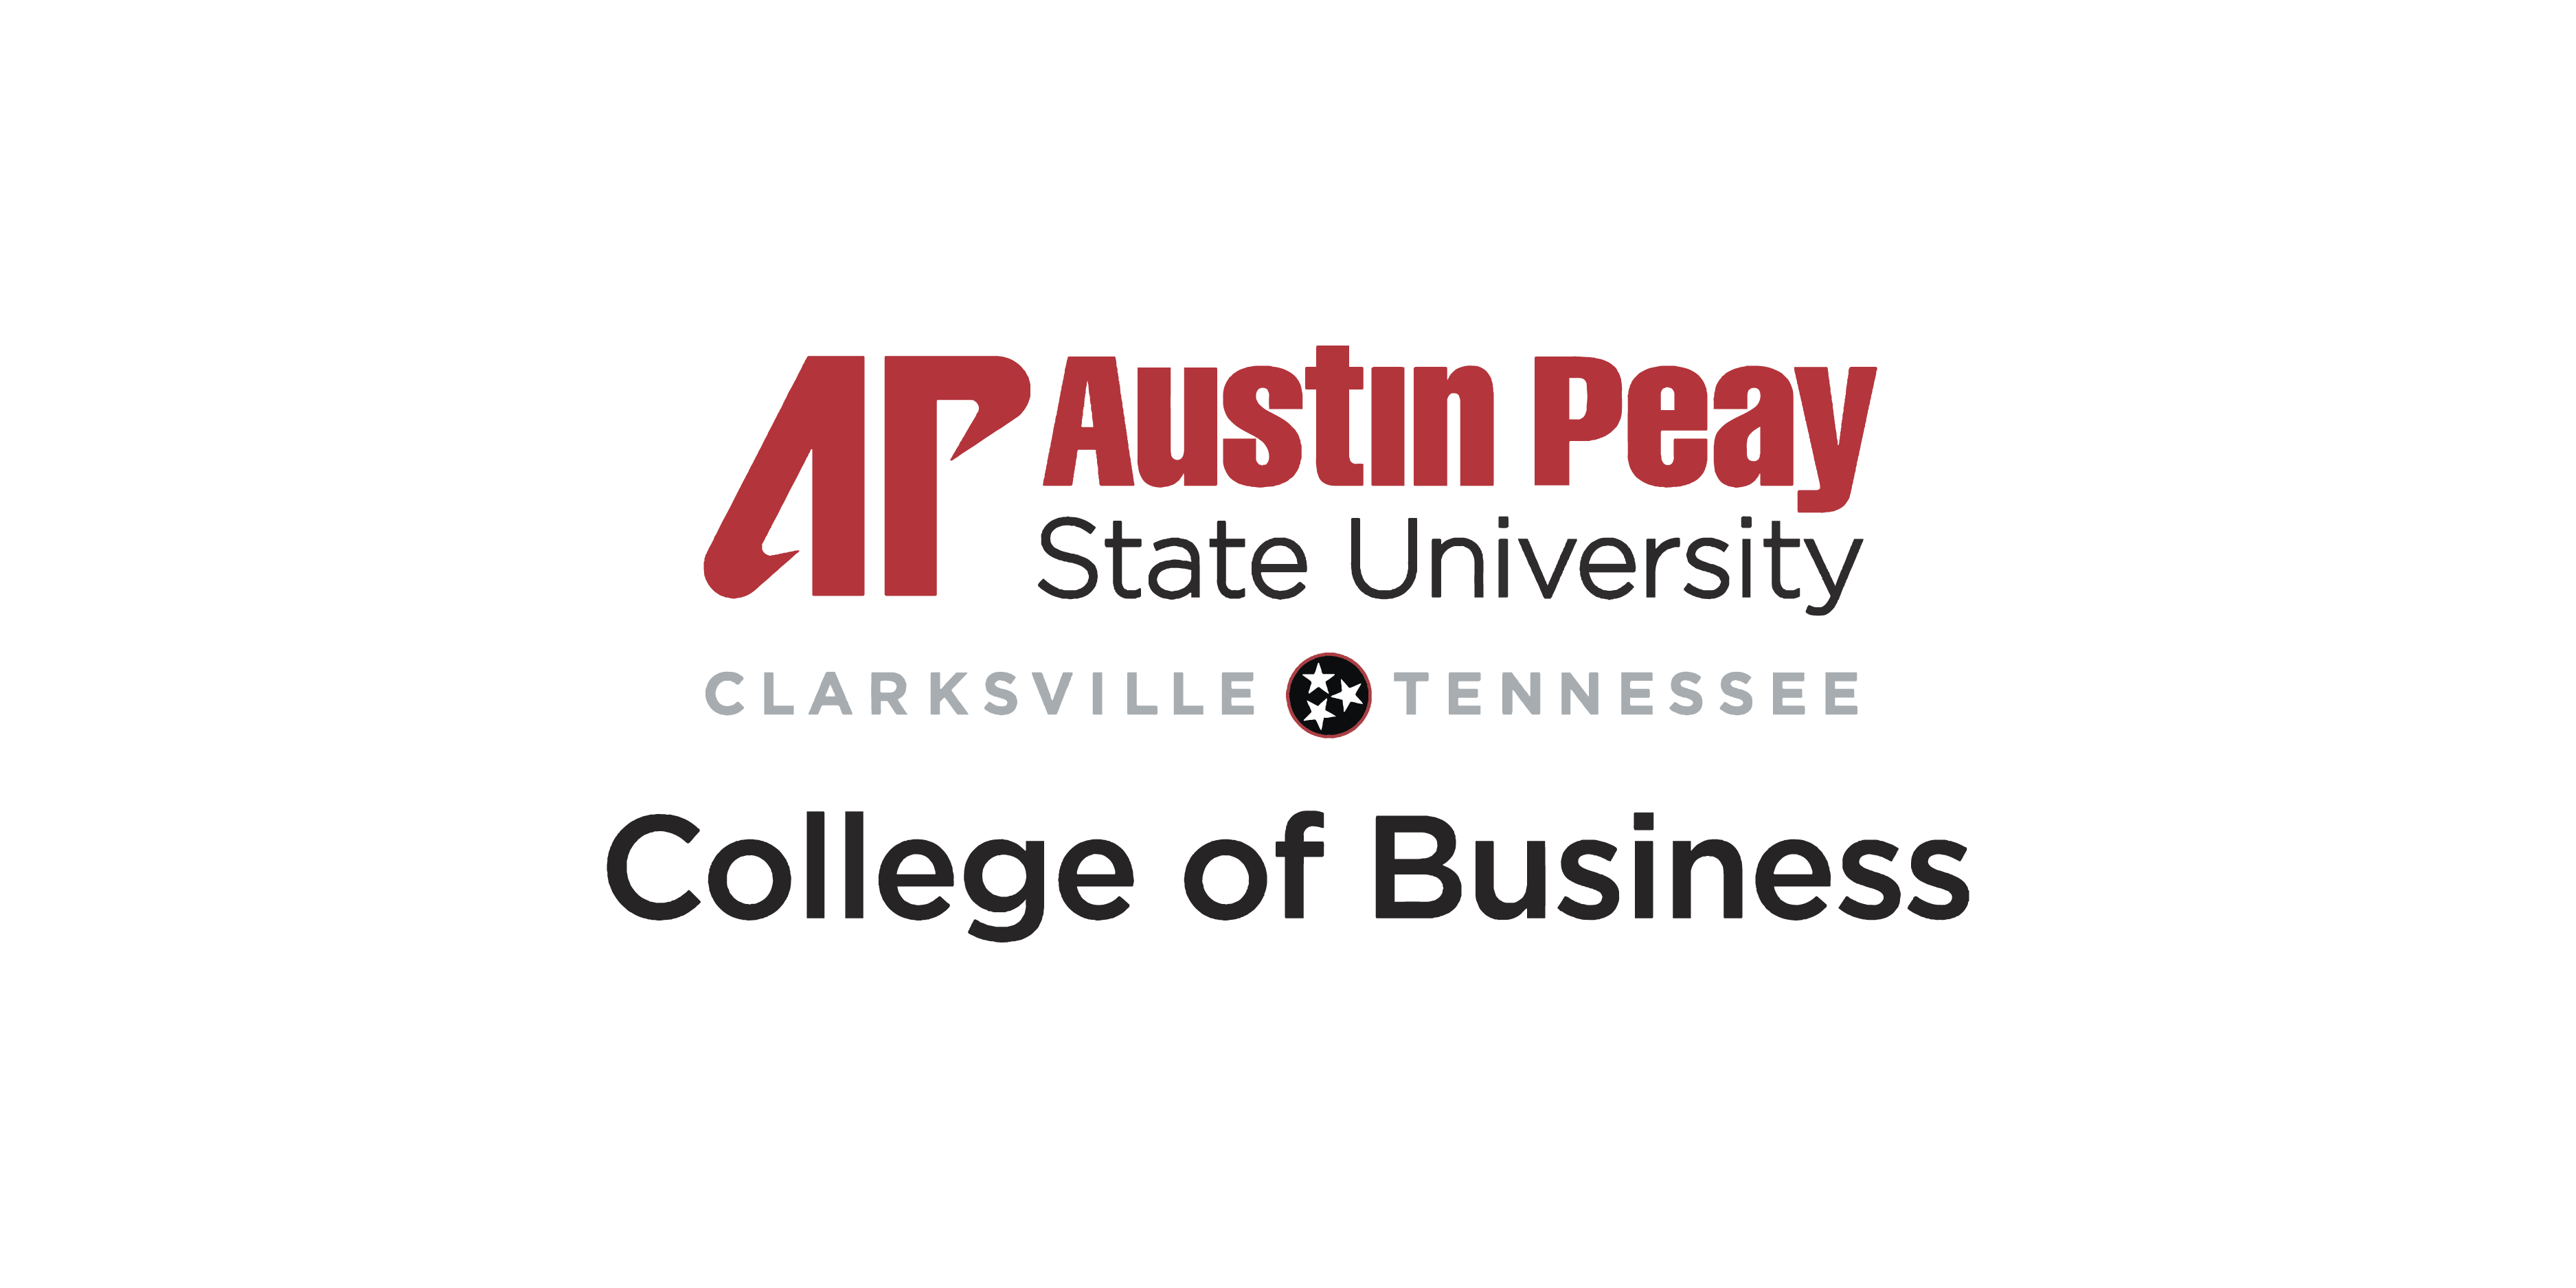 College of Business at Austin Peay State University